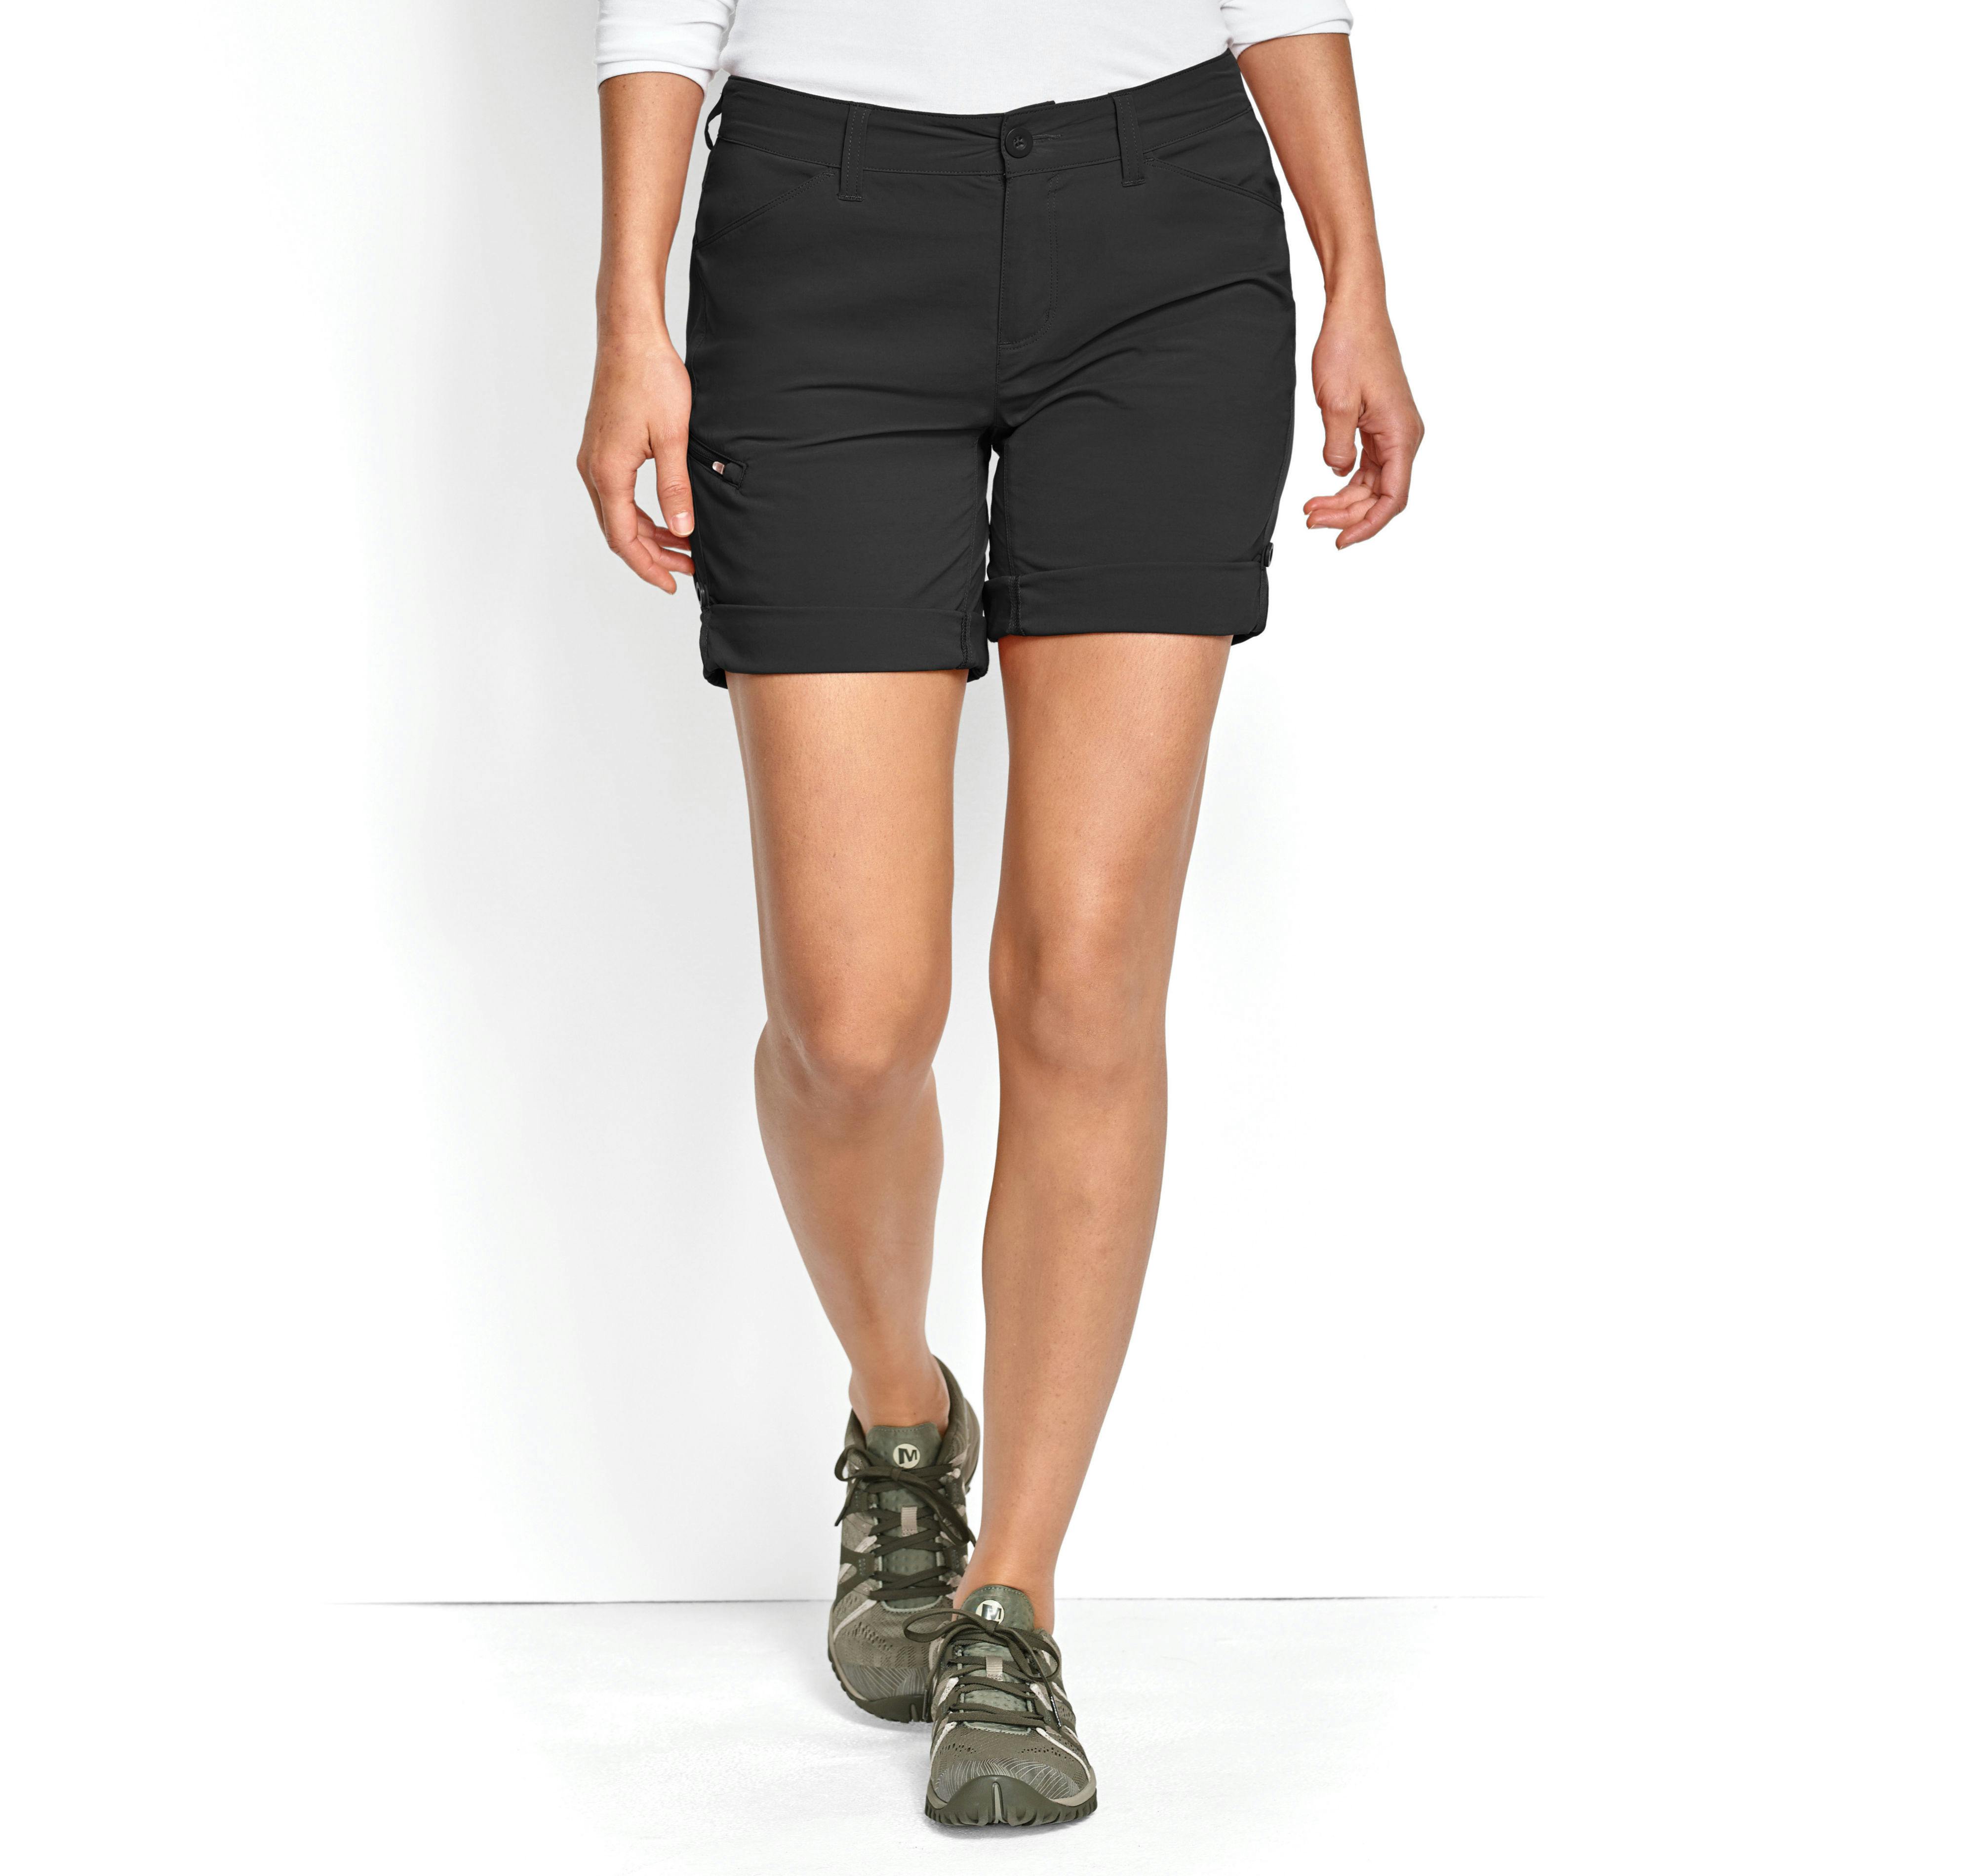 Orvis Women's Jackson Quick-Dry Natural Fit Convertible 8½" Shorts